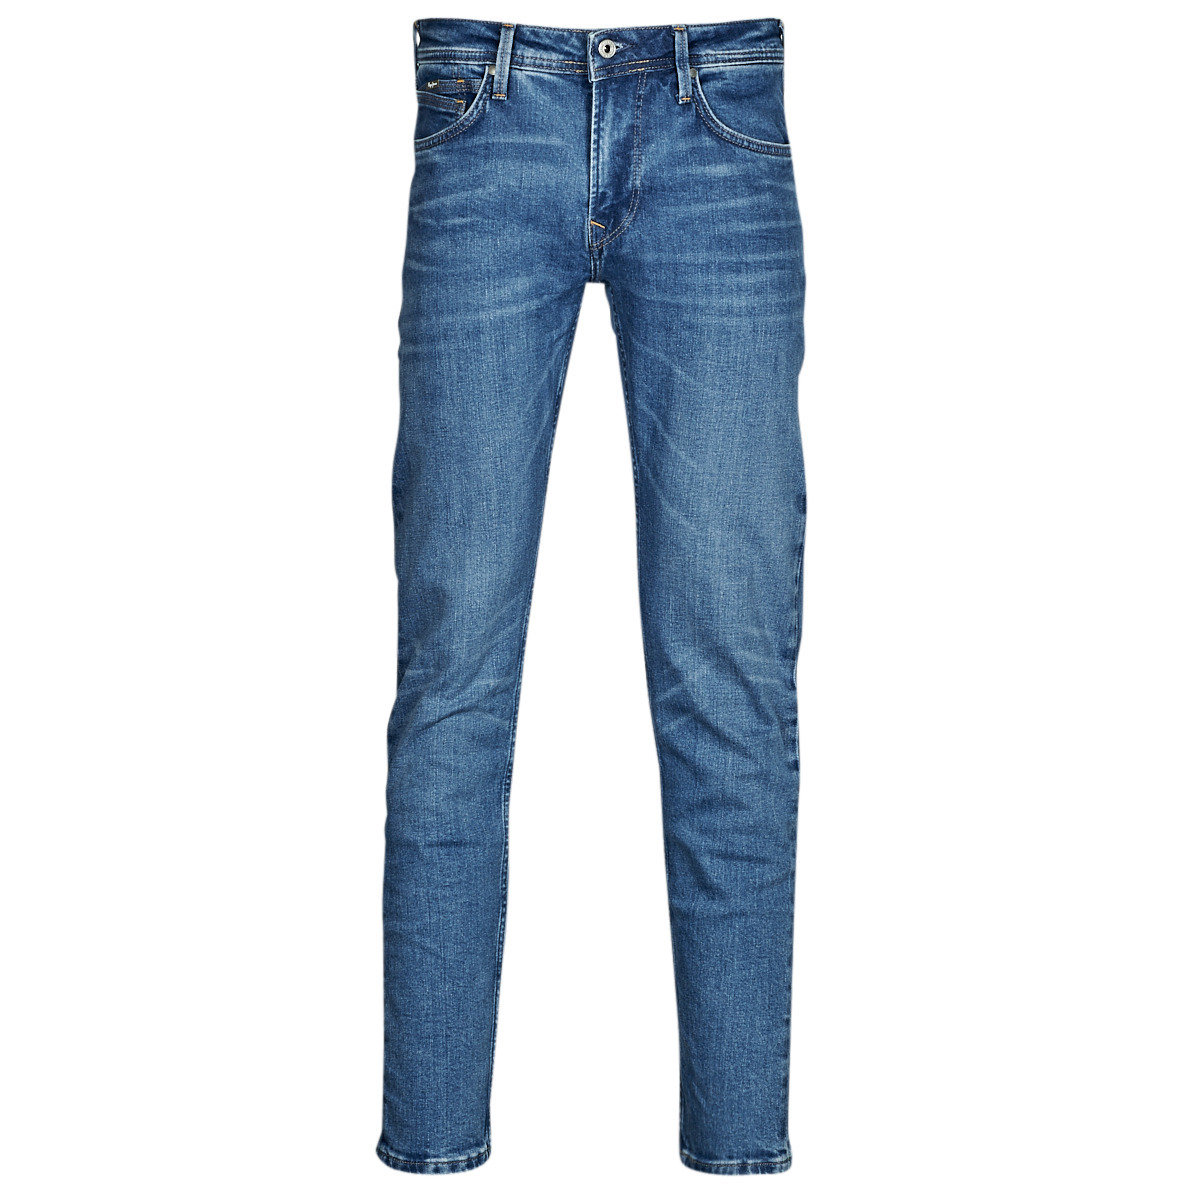 Gents Blue Skinny Jeans Spartoo - Pepe Jeans GOOFASH